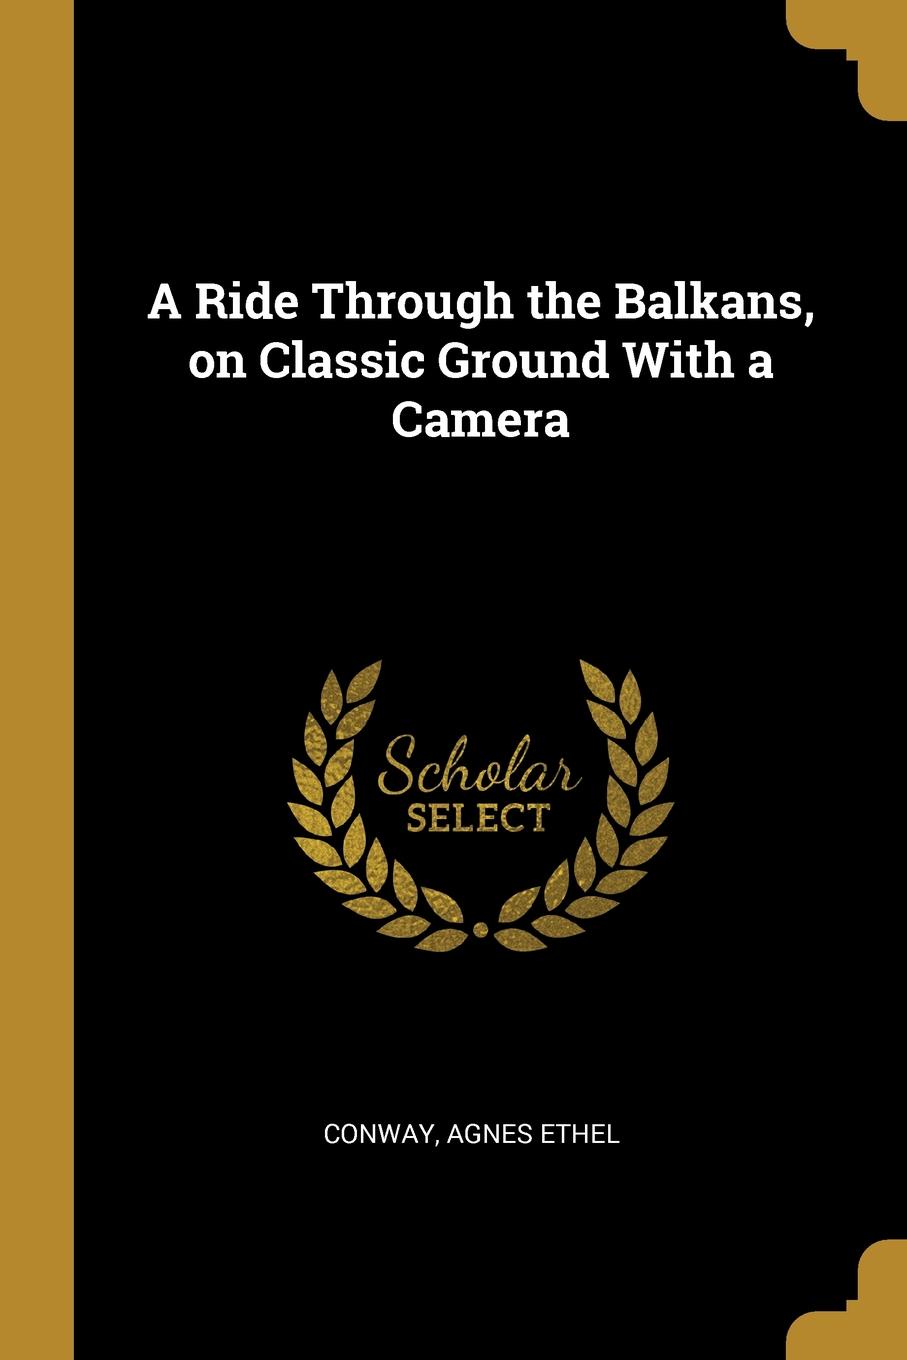 A Ride Through the Balkans, on Classic Ground With a Camera